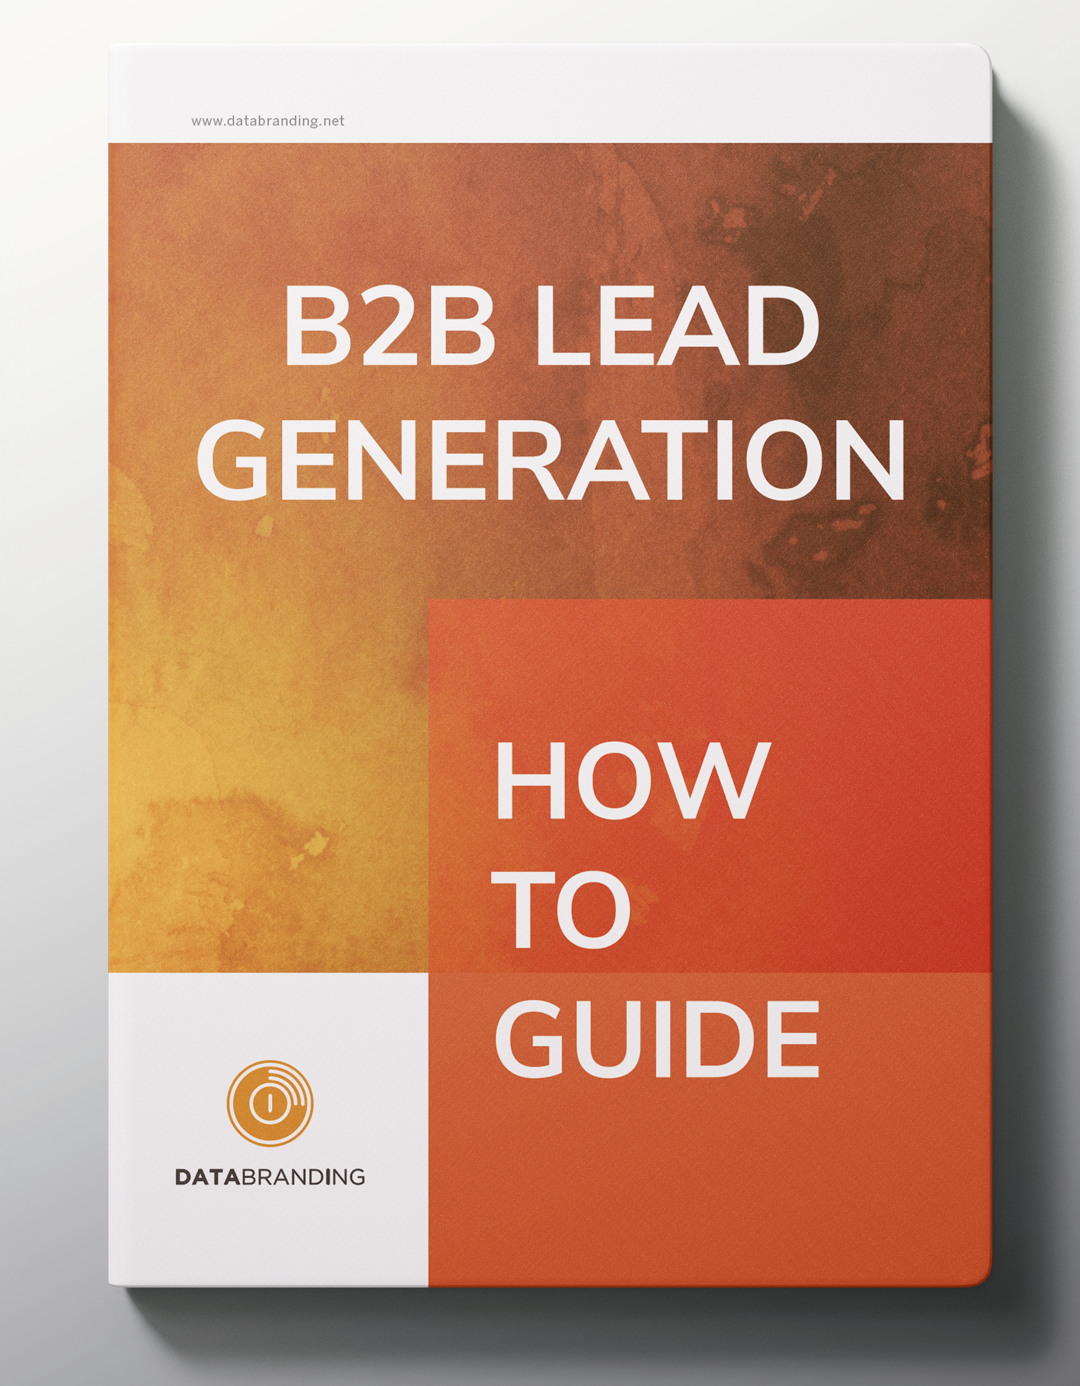 B2B-LEAD-GENERATION-HOW-TO-GUIDE